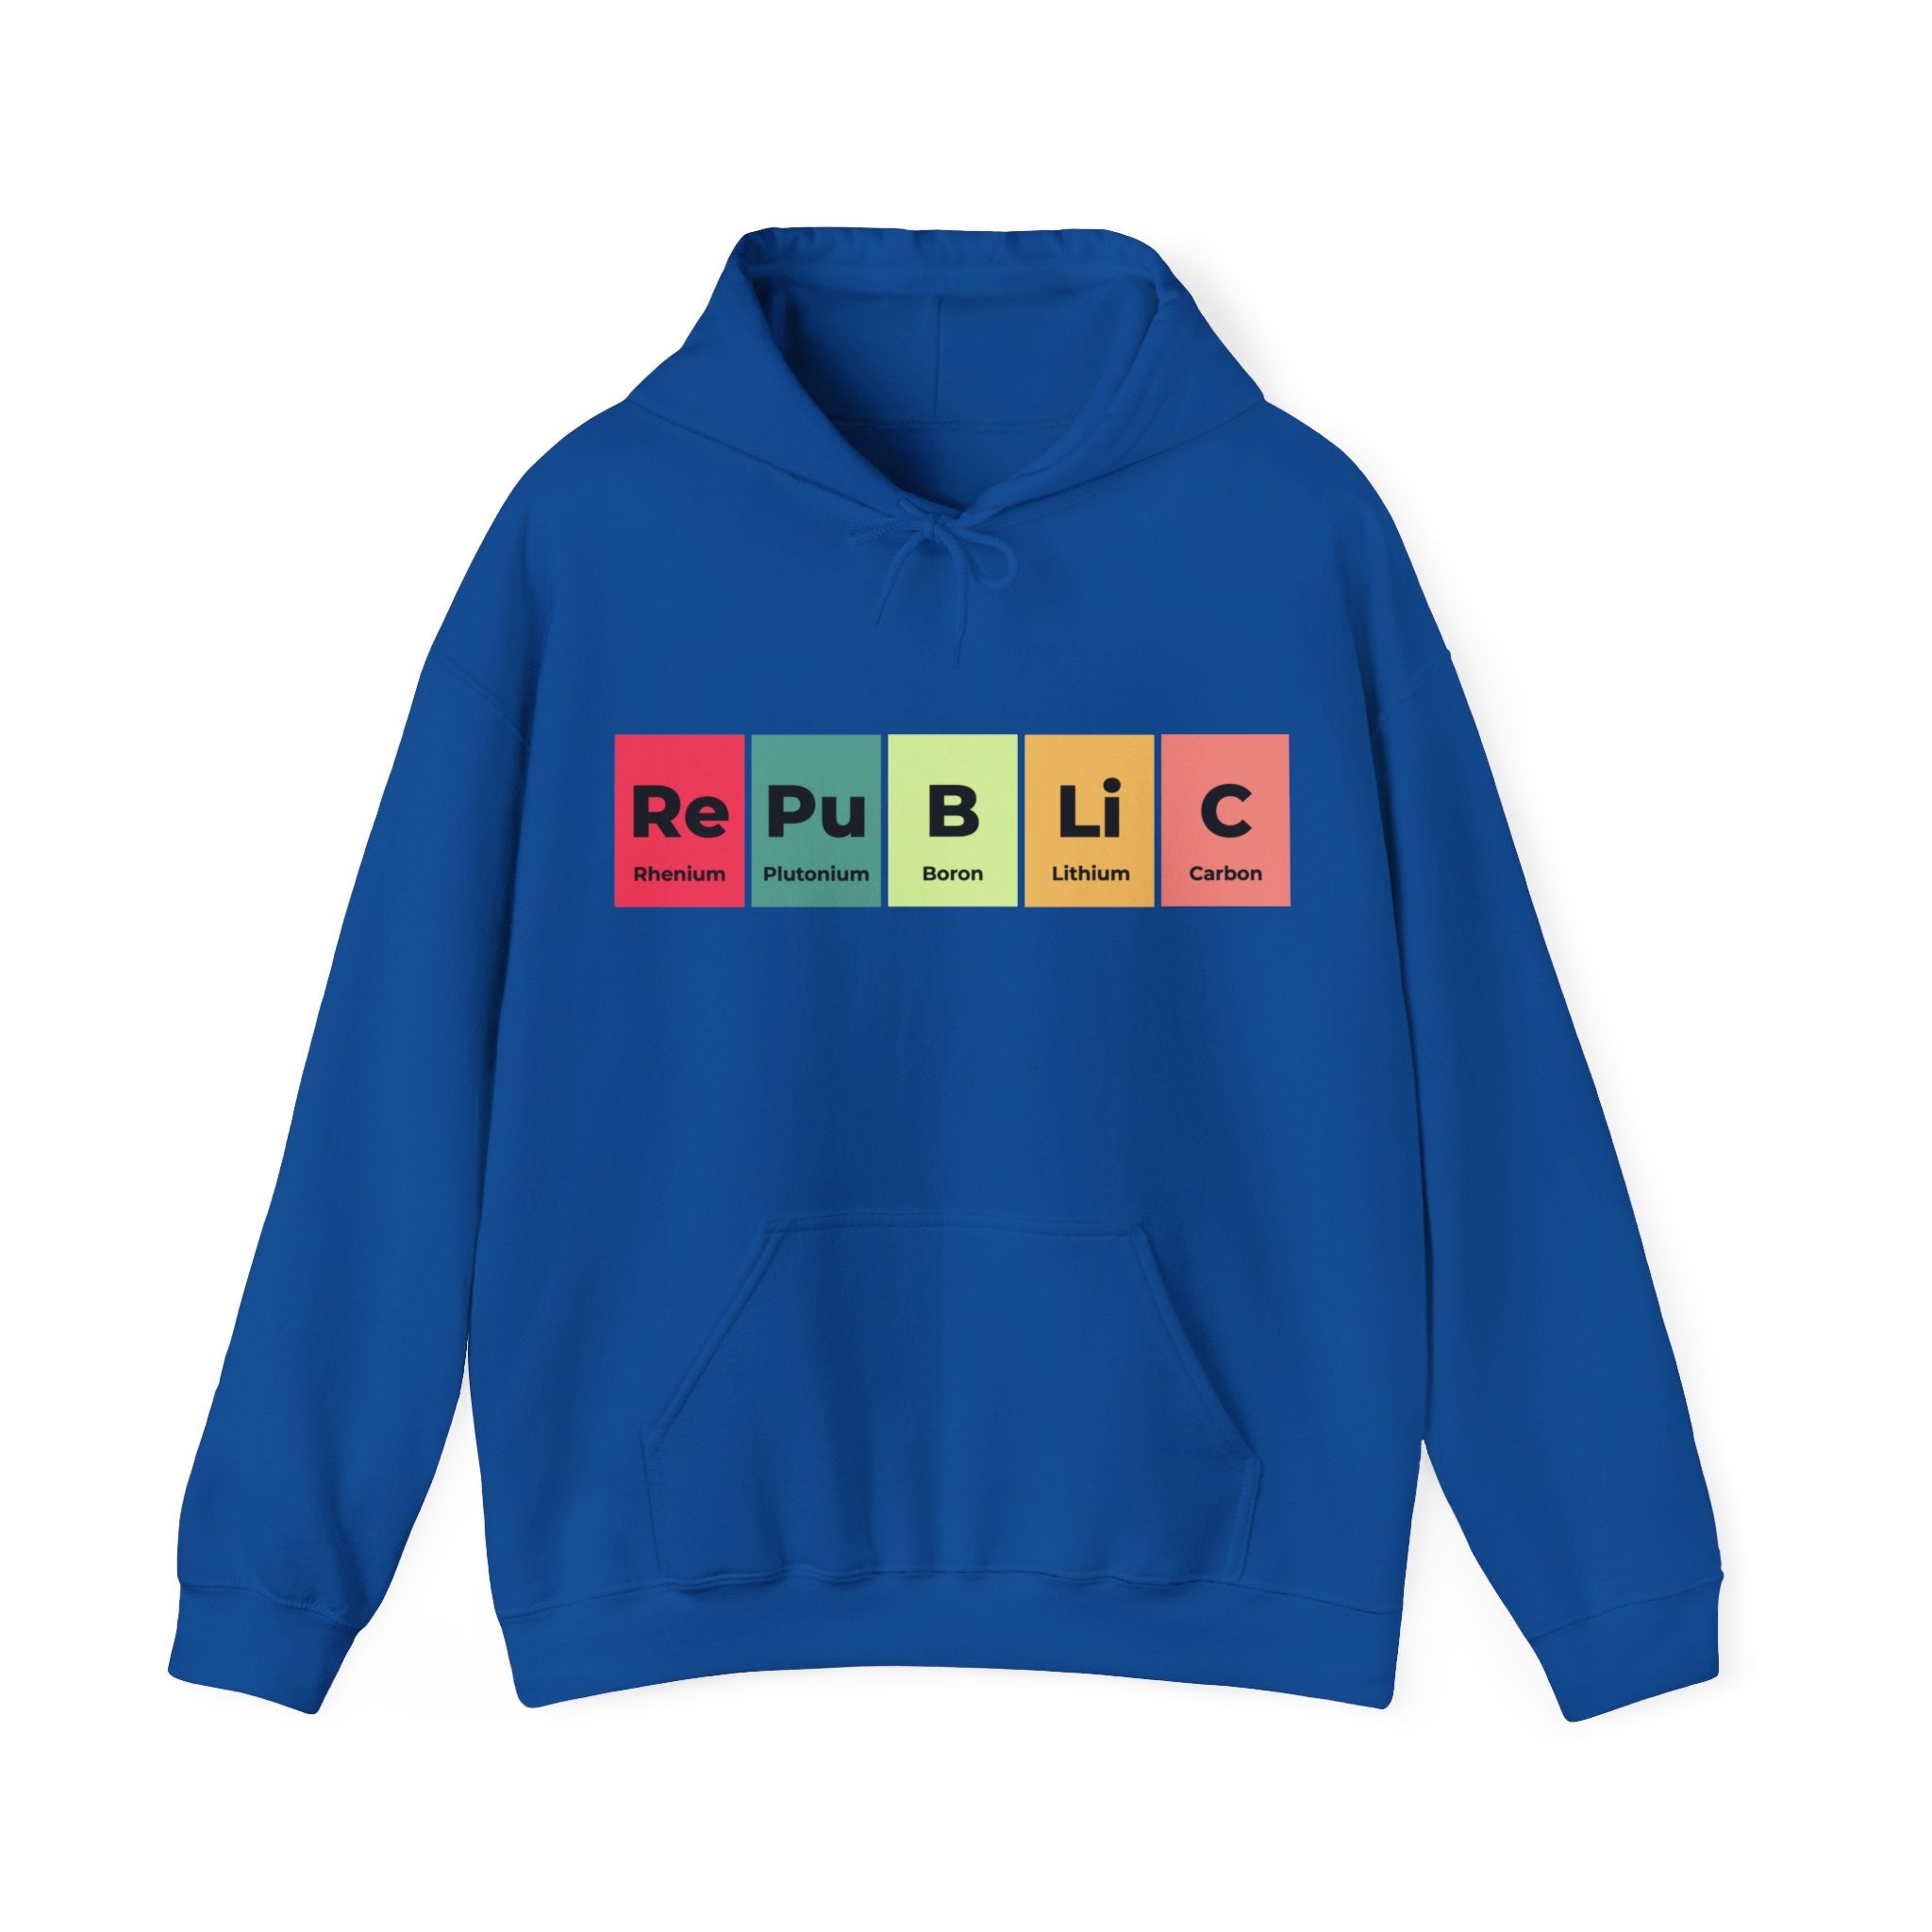 A Republic - Hooded Sweatshirt featuring a design with colorful blocks representing chemical elements spelling out "RePuBLiC," perfect for showcasing your patriotic pride.